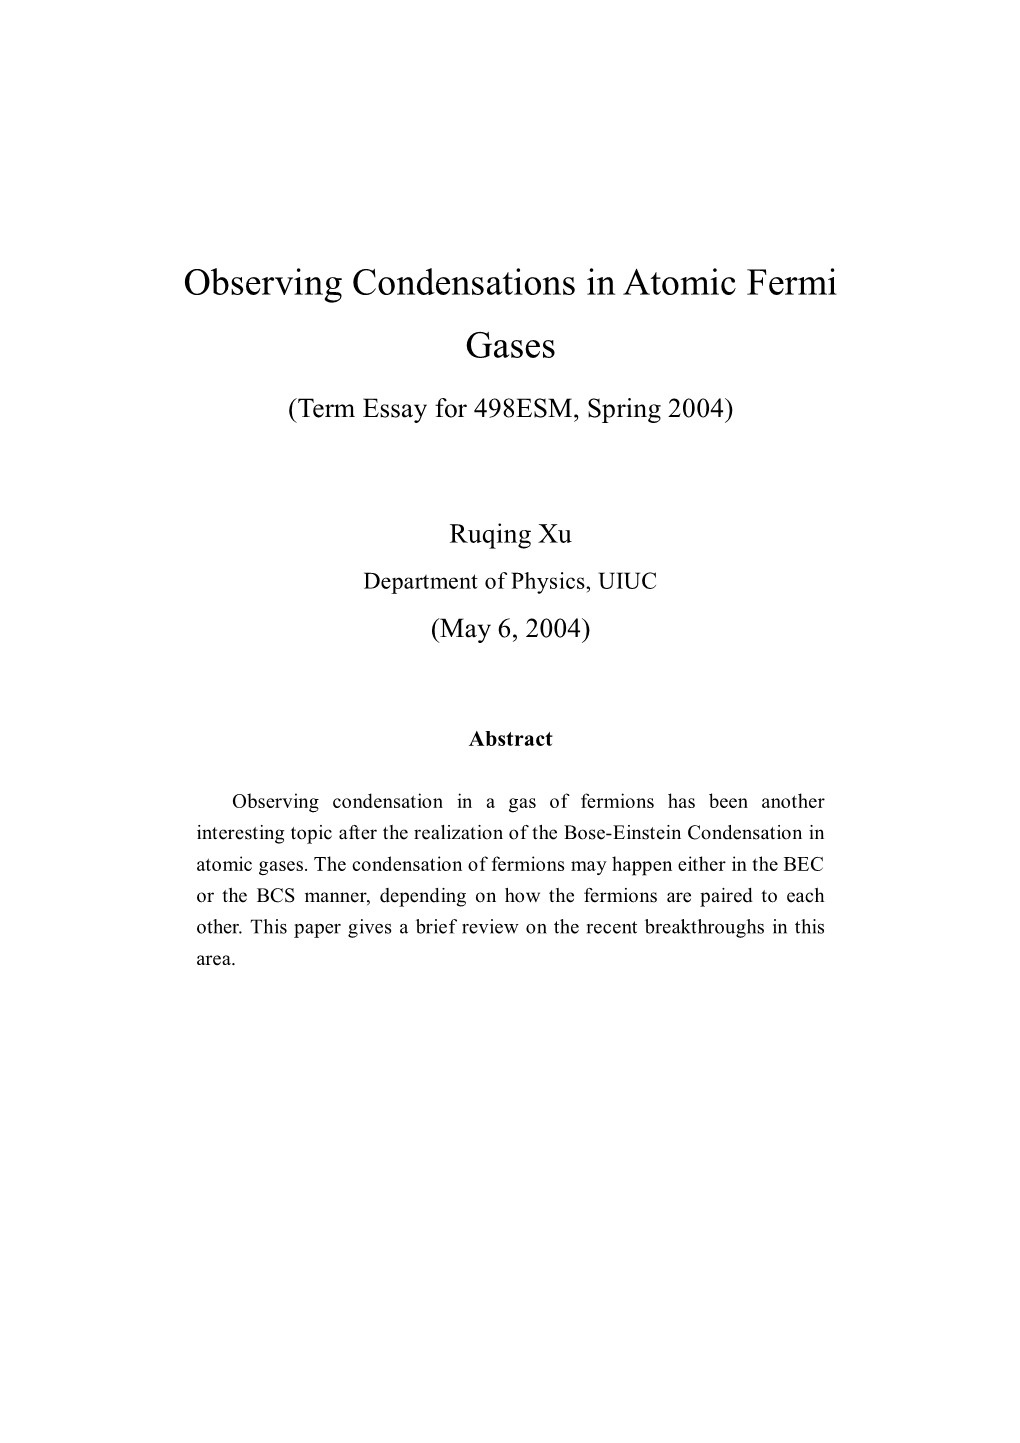 Observing Condensations in Atomic Fermi Gases